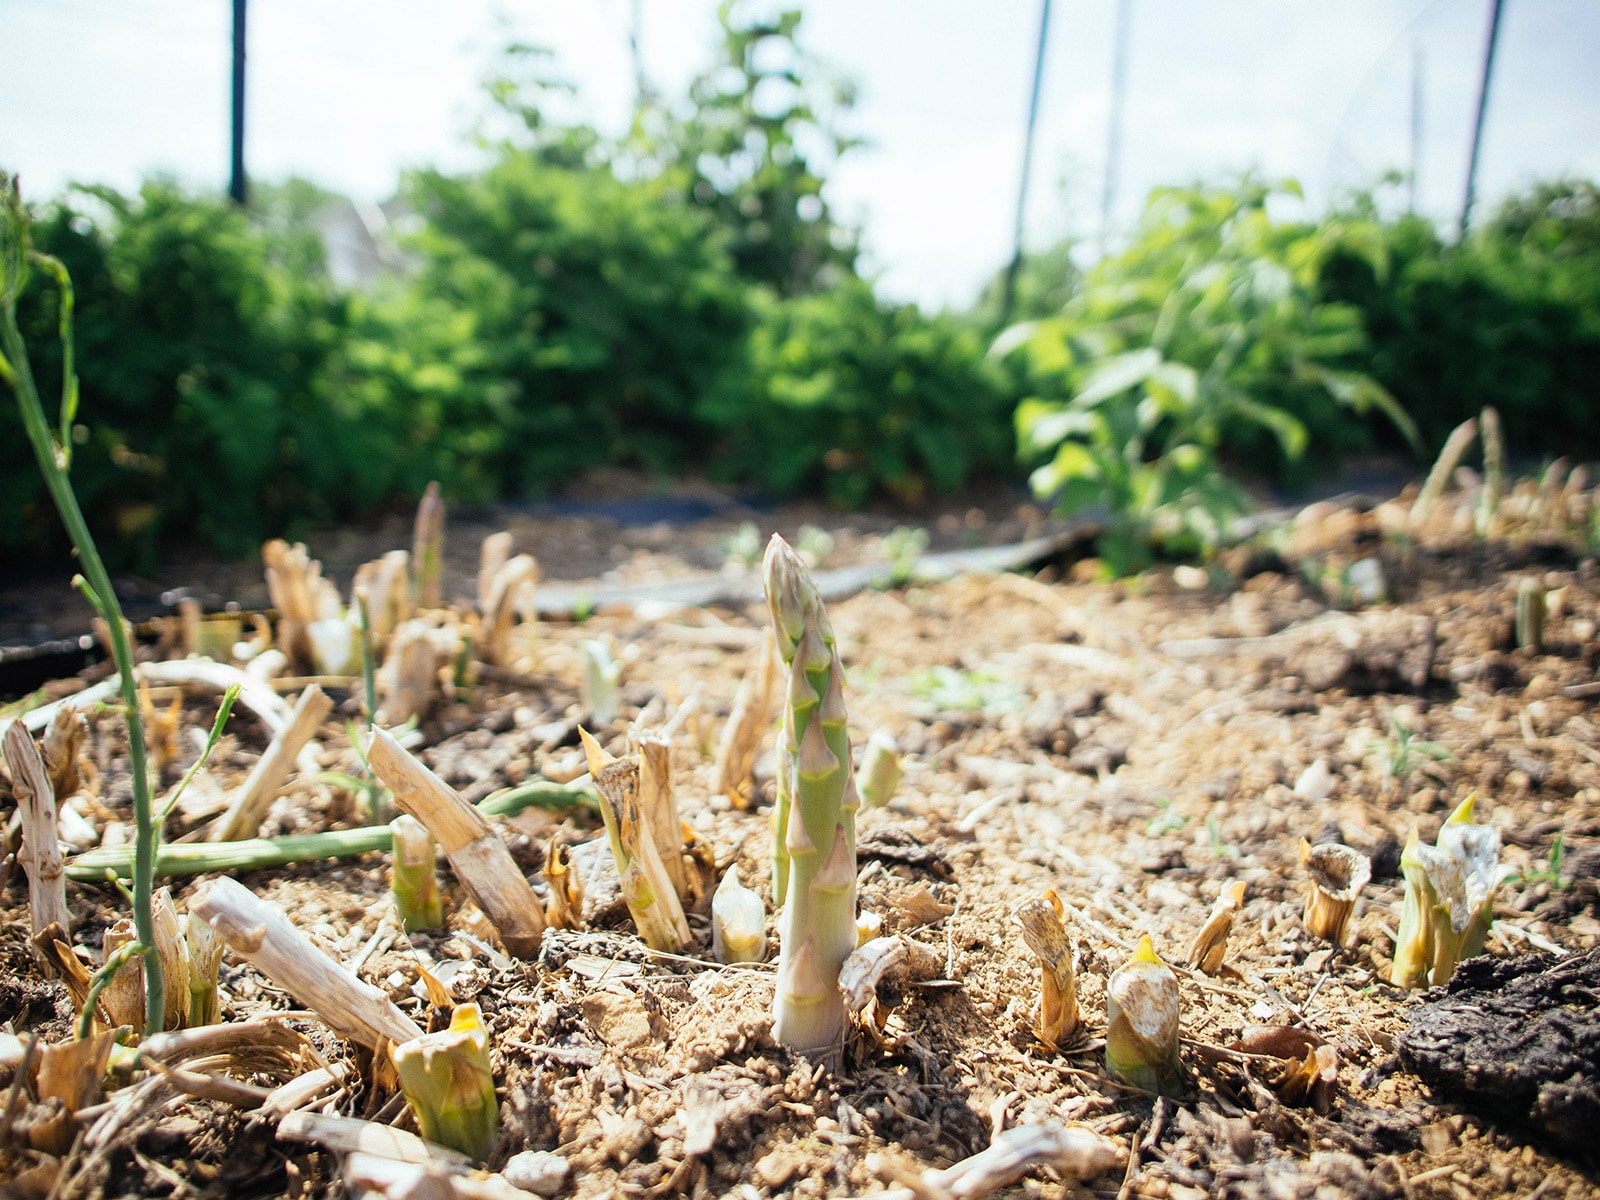 Lone asparagus spear growing in a mature asparagus bed